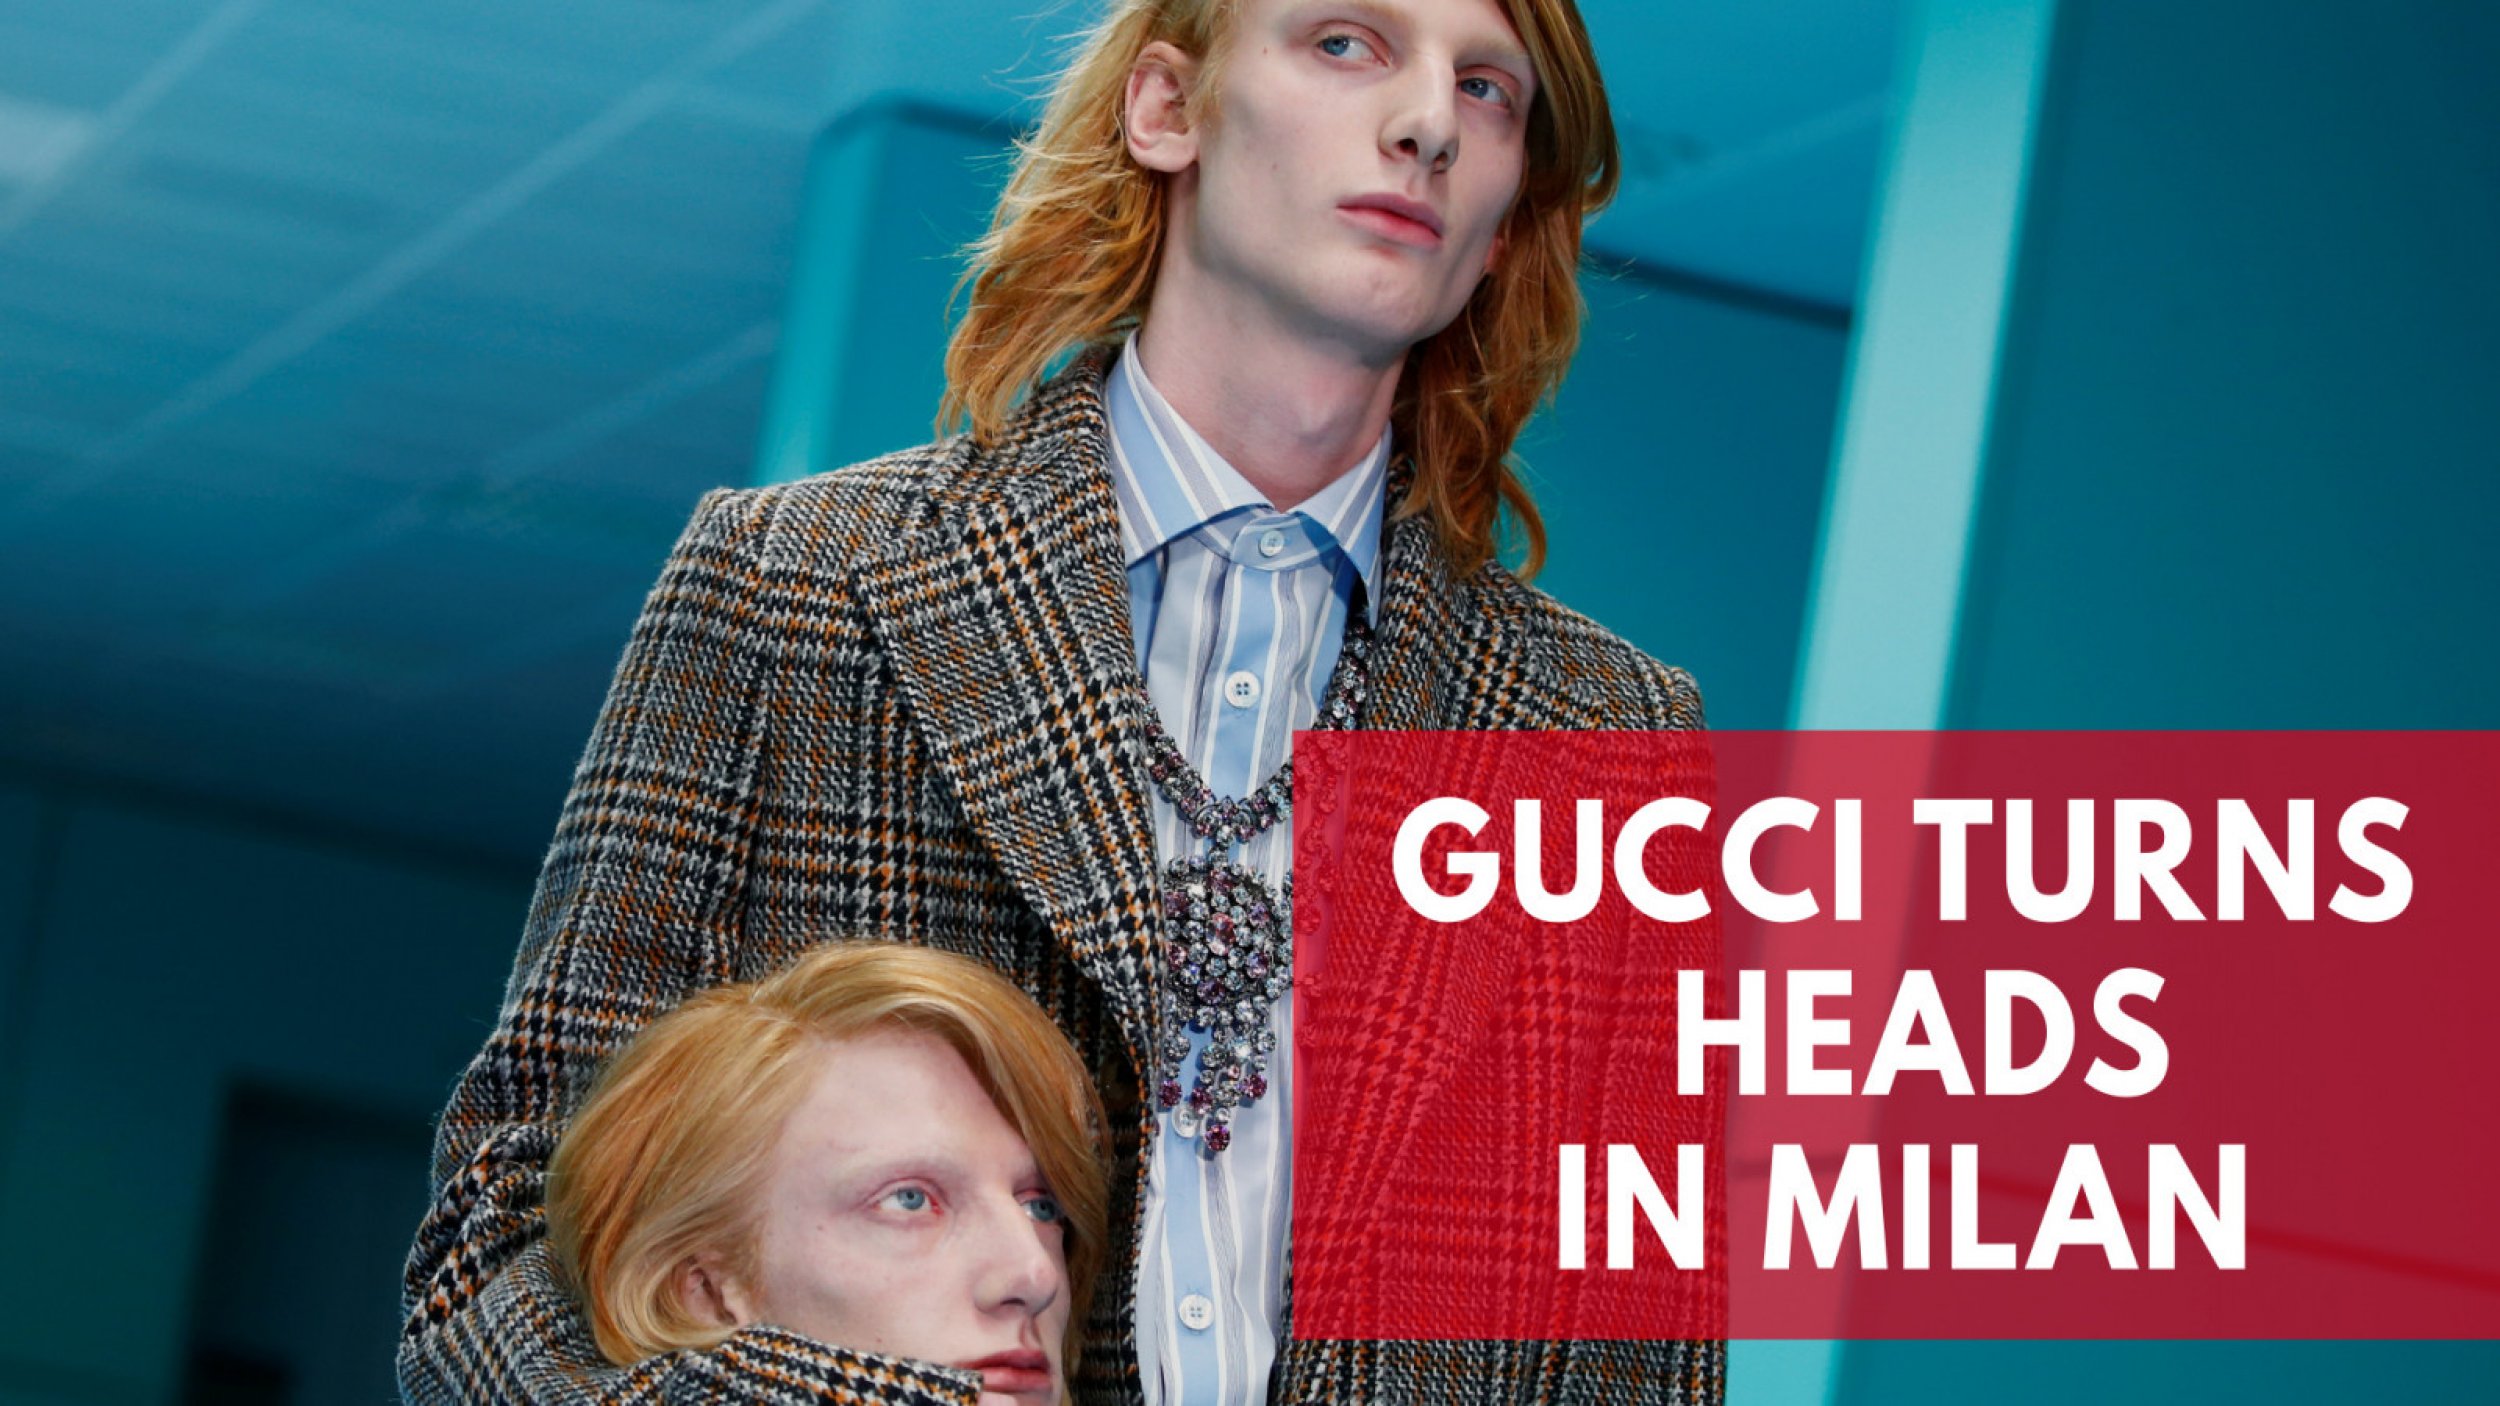 Gucci Models Show Off Replicas Of Their Own Heads At Milan Fashion Week